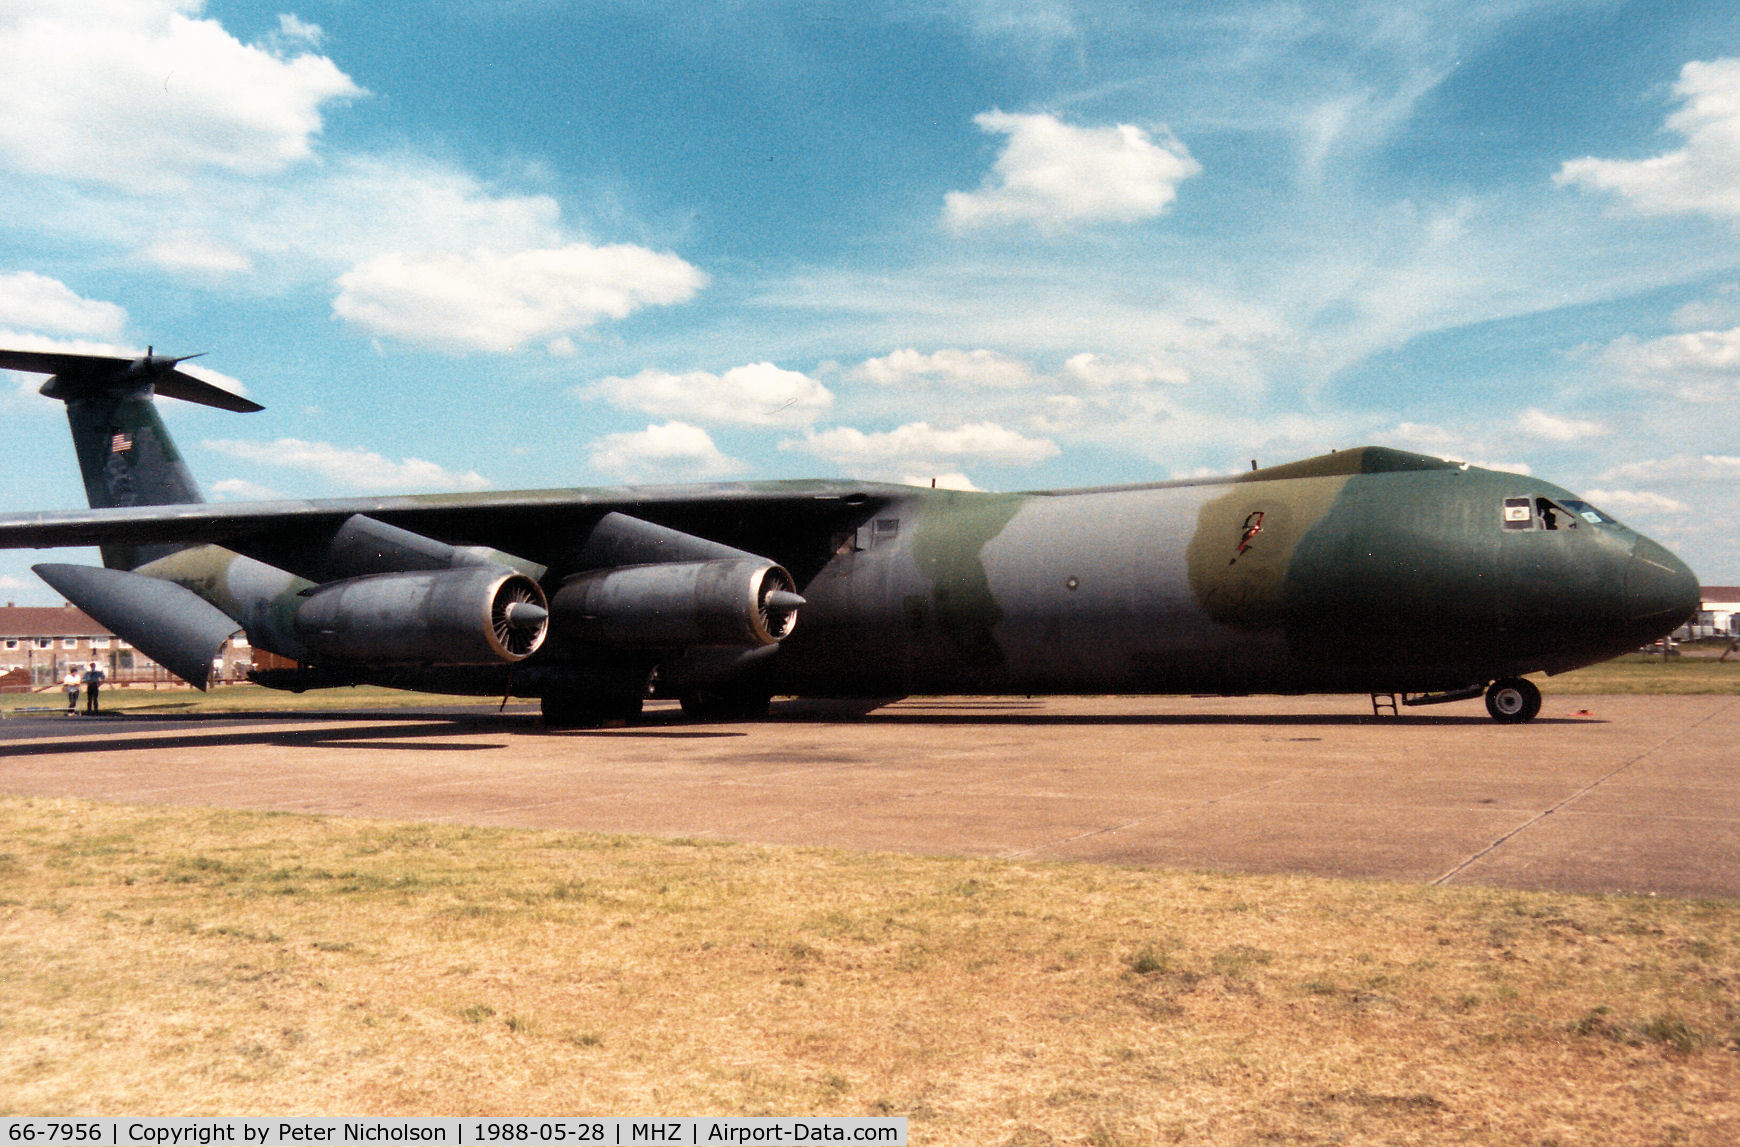 66-7956, 1966 Lockheed C-141B Starlifter C/N 300-6248, C-141B Starlifter of 437th Military Airlift Wing based at Charleston AFB on display at the 1988 RAF Mildenhall Air Fete.